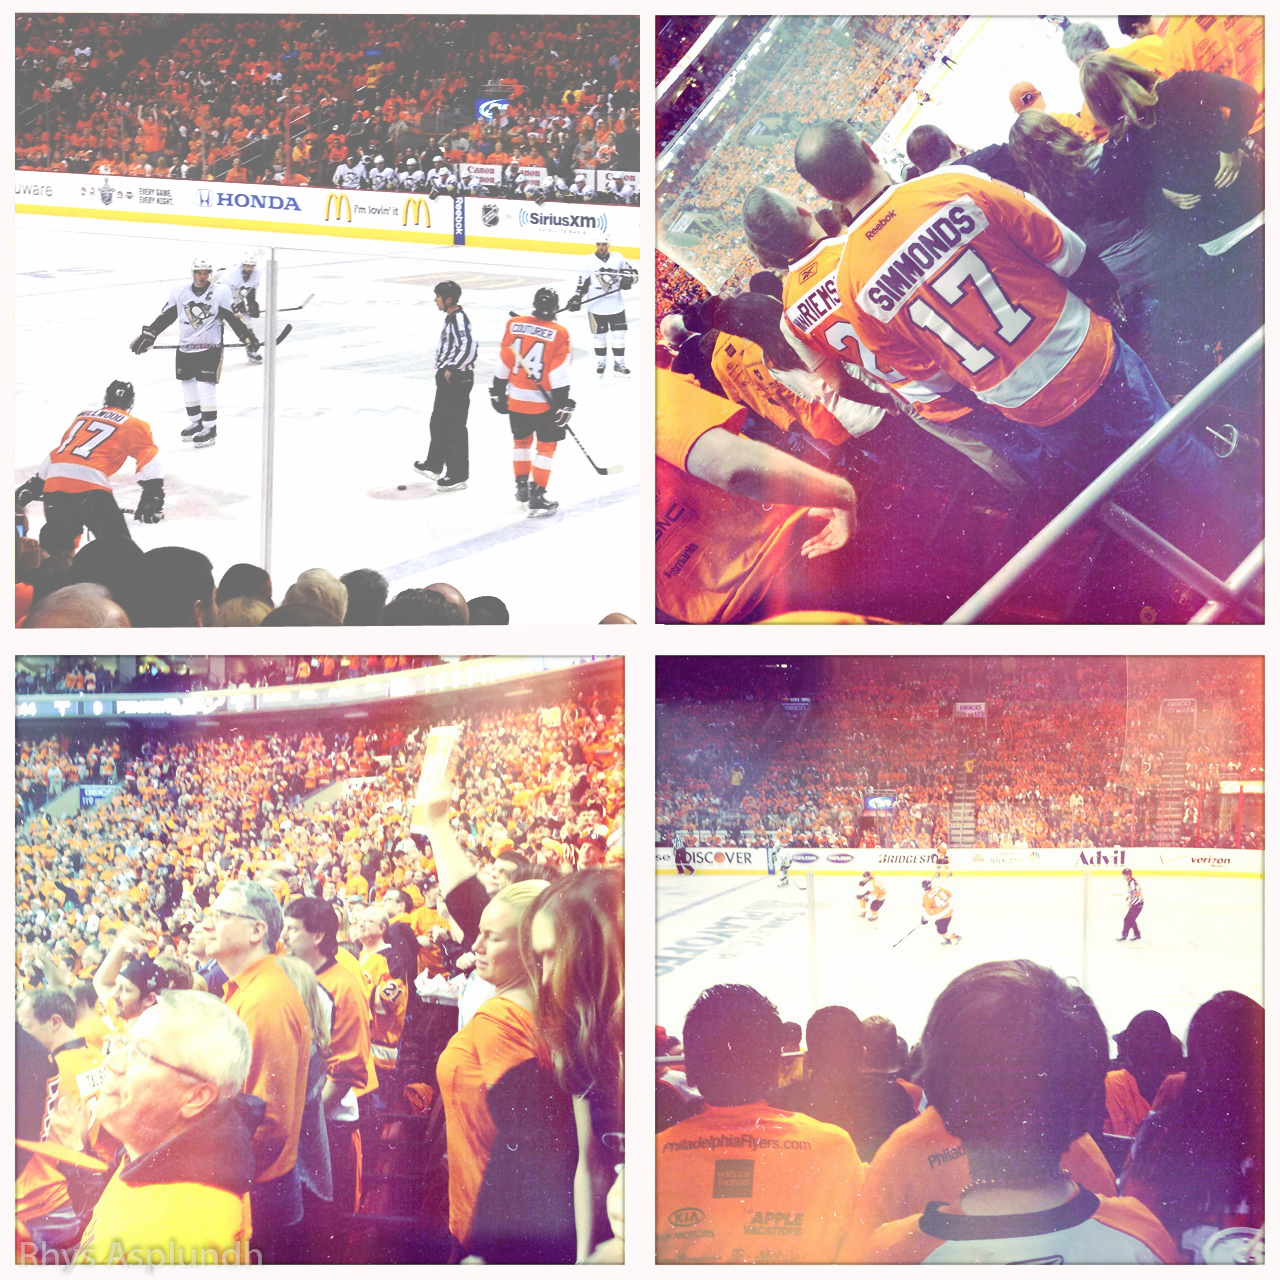 multiple images show fans in front of a hockey rink with one fan holding up his hand